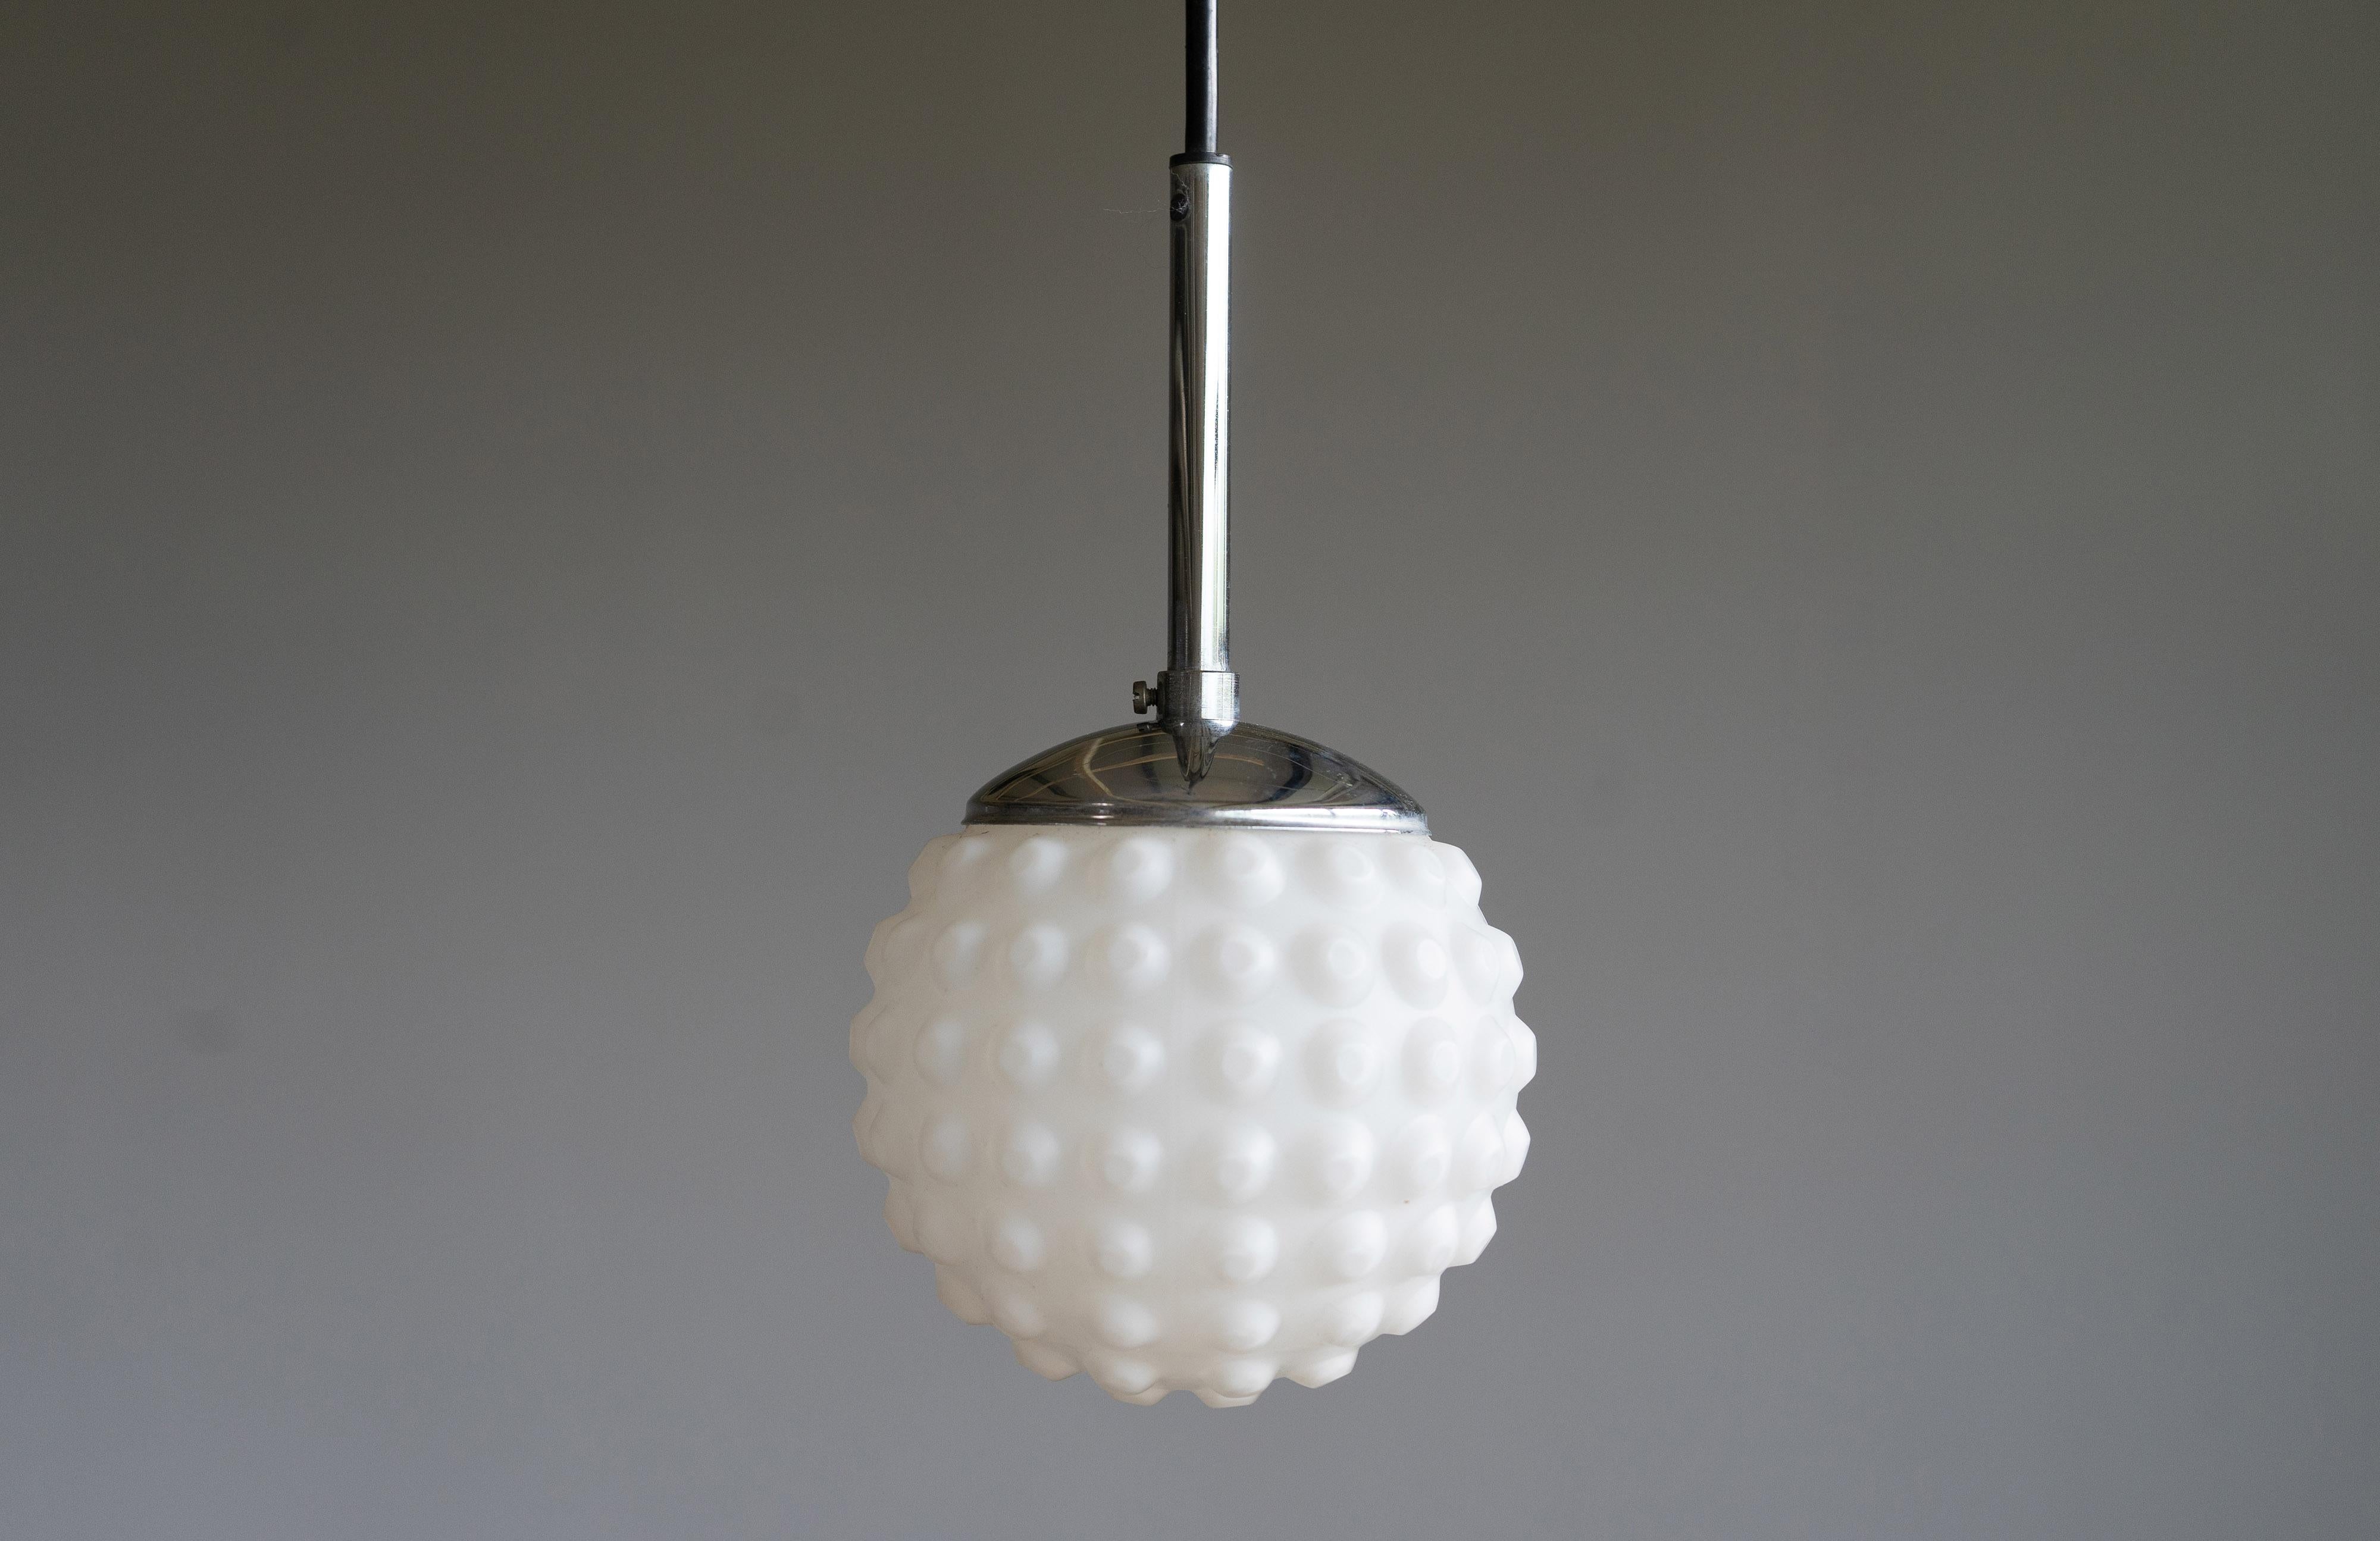 One of twenty smaller vintage opaline glass globe lights, model p117 from Staff Leuchten, designed by Rolf Krüger. The lights are made for E14 sockets and can be wired with a black cable of the desired length according to customer requirements. They